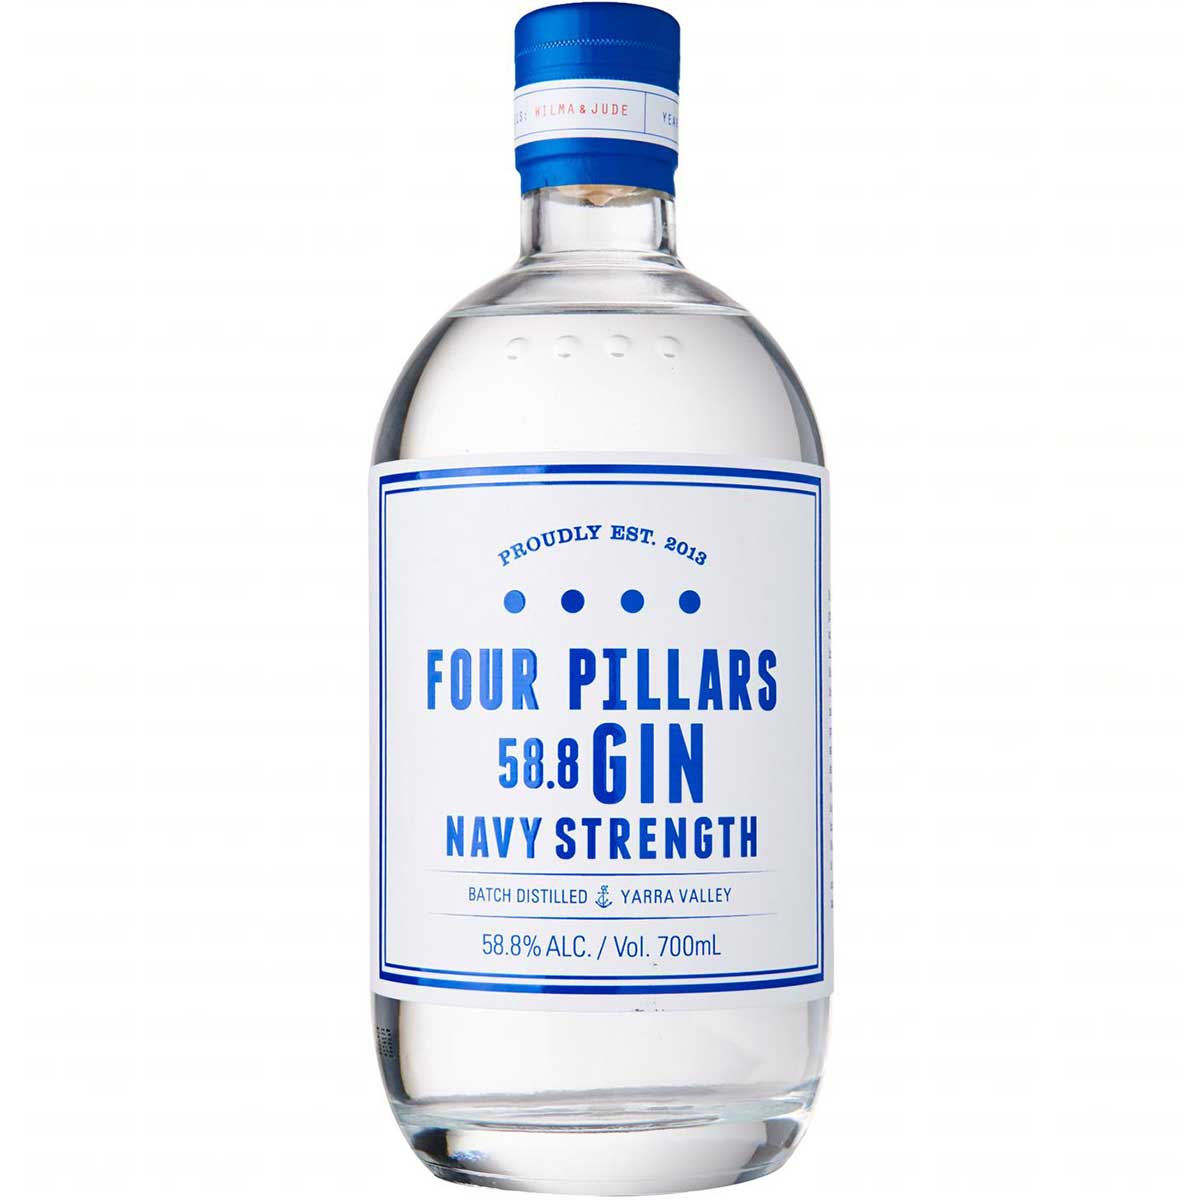 Four Pillars Navy Strength Gin - Premium Gin from Four Pillars - Shop now at Whiskery